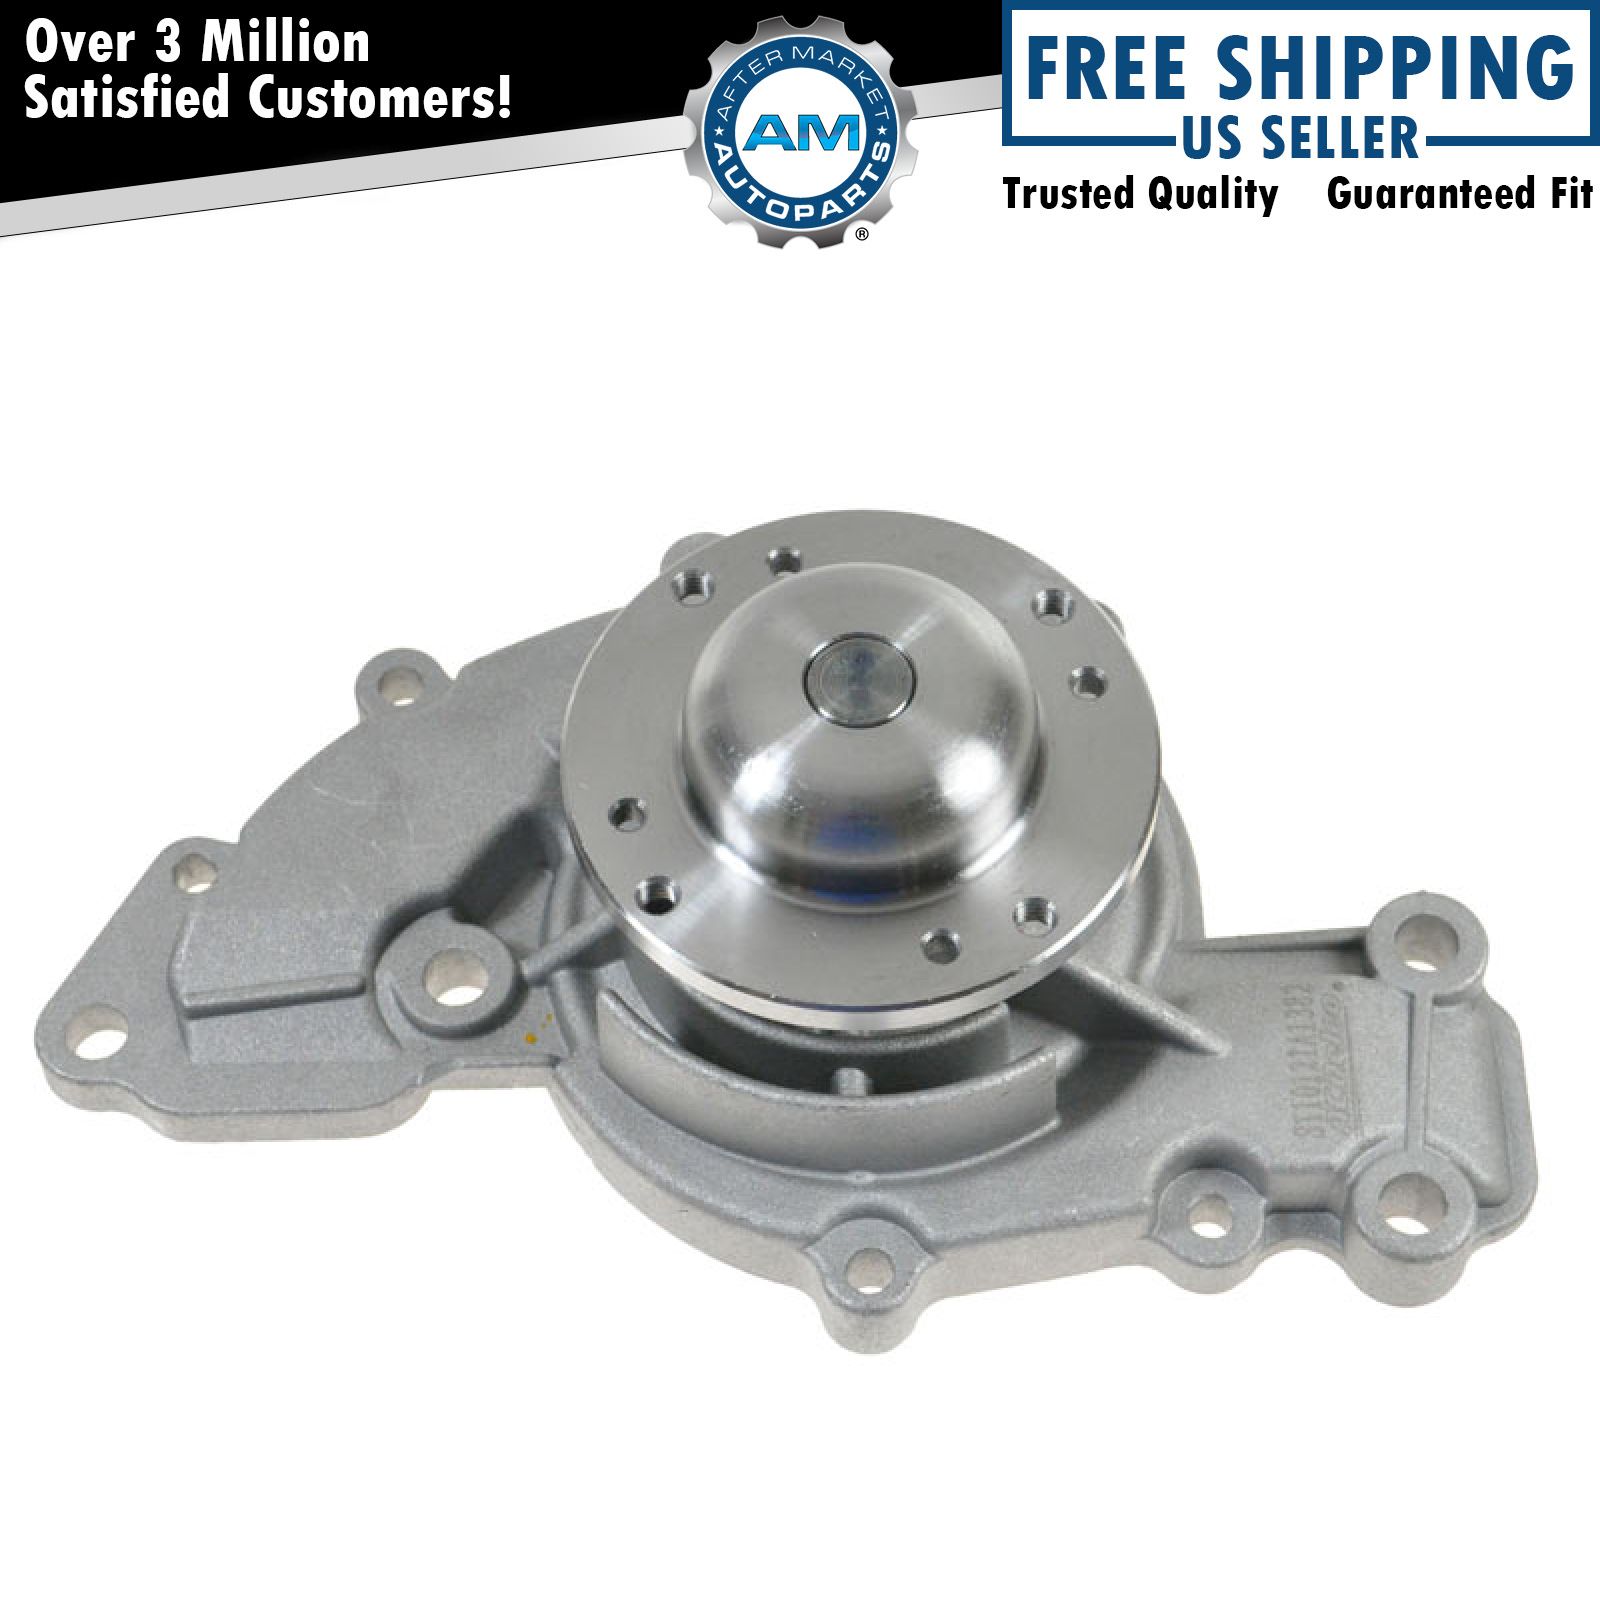 AC DELCO 252-693 Water Pump for Chevy Olds Pontiac Buick Cadillac Car 3.8L V6